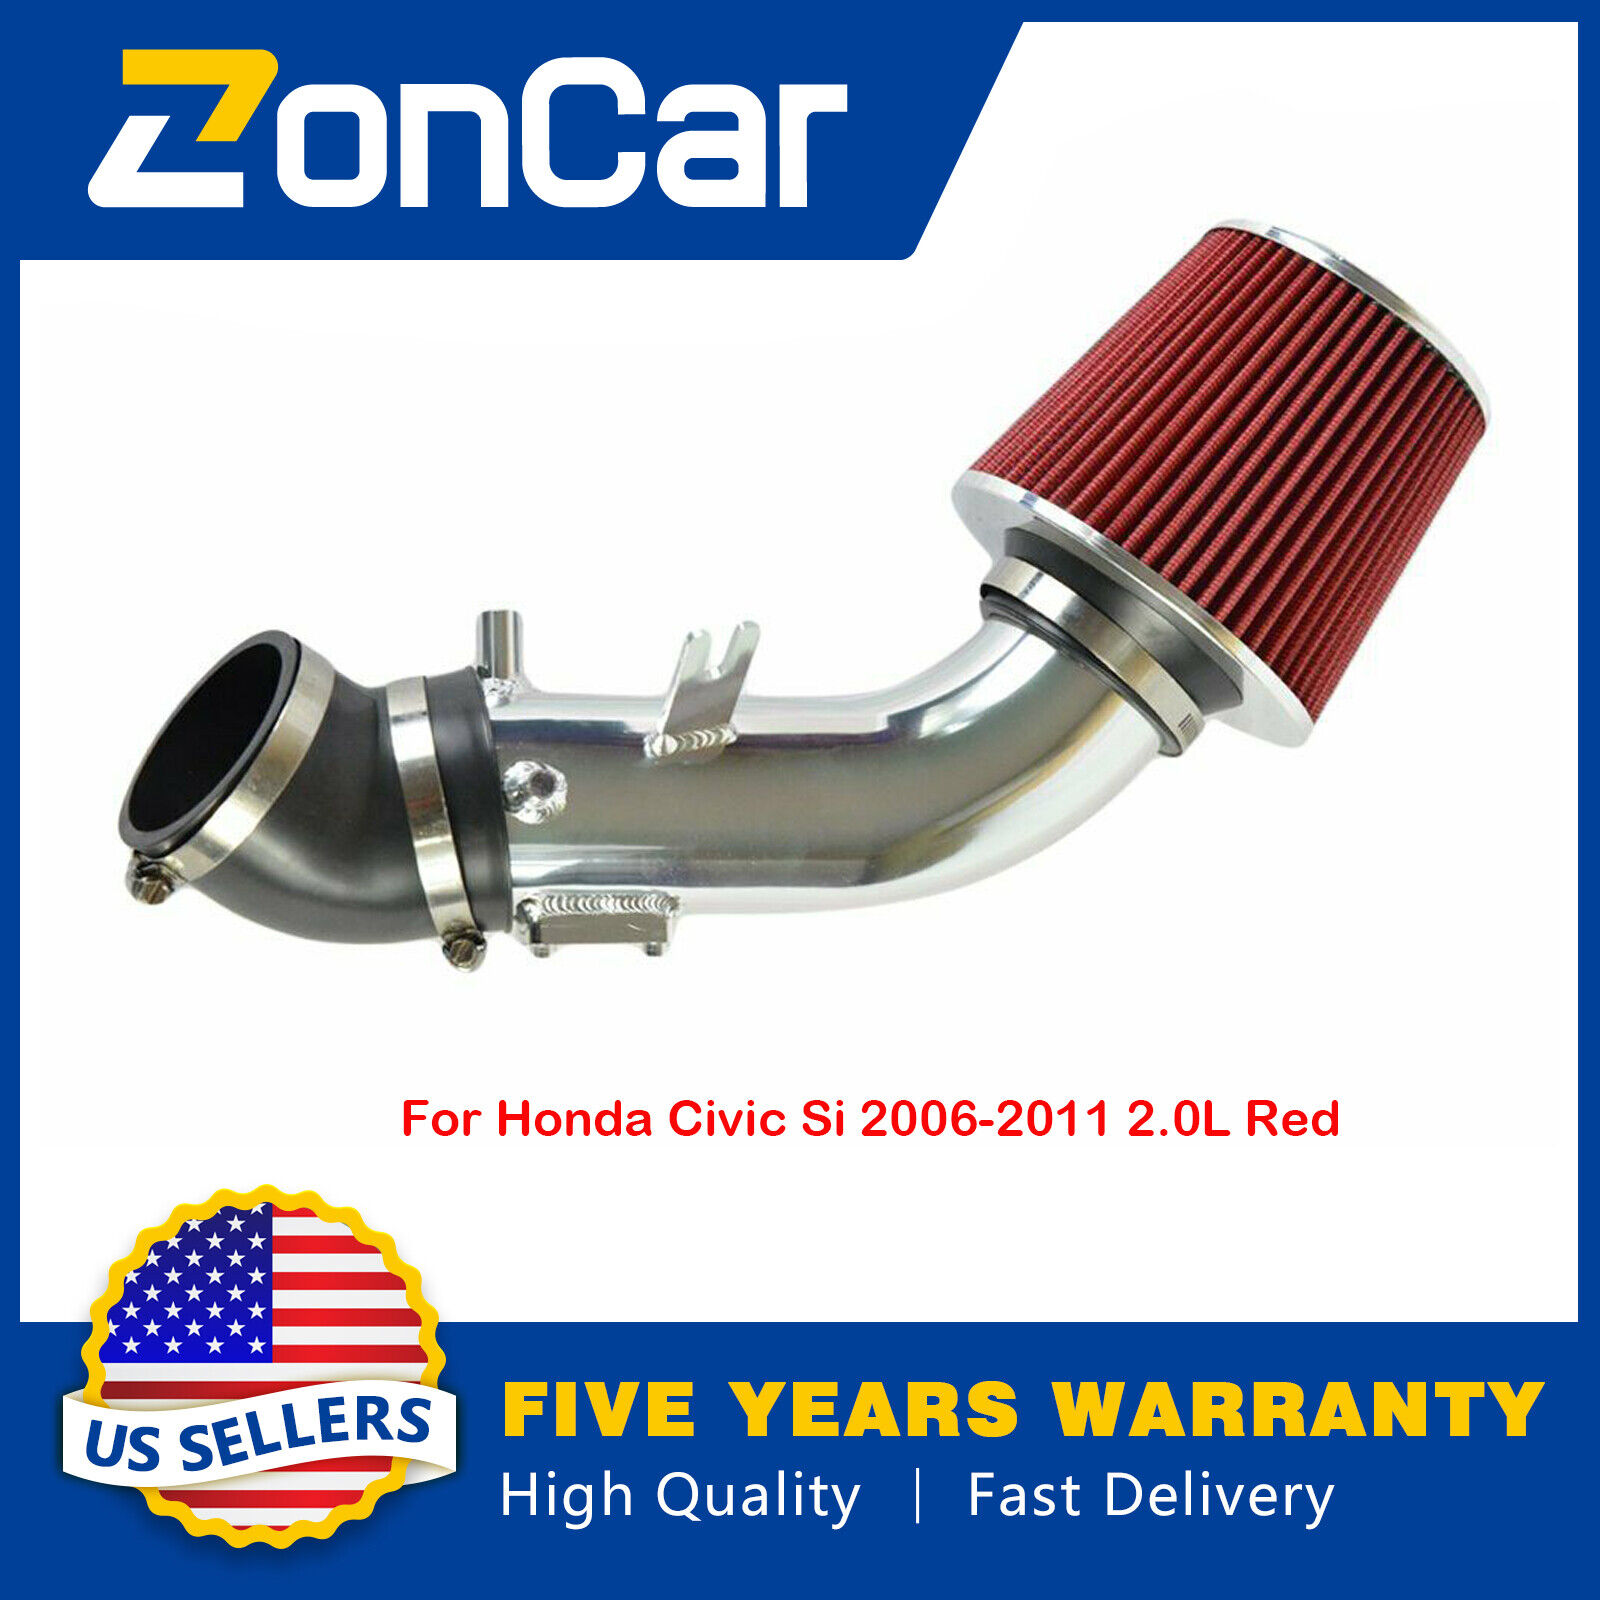 Cold Air Intake Kit With Filter For Honda Civic Si 2006-2011 2.0L Red 2007 2008